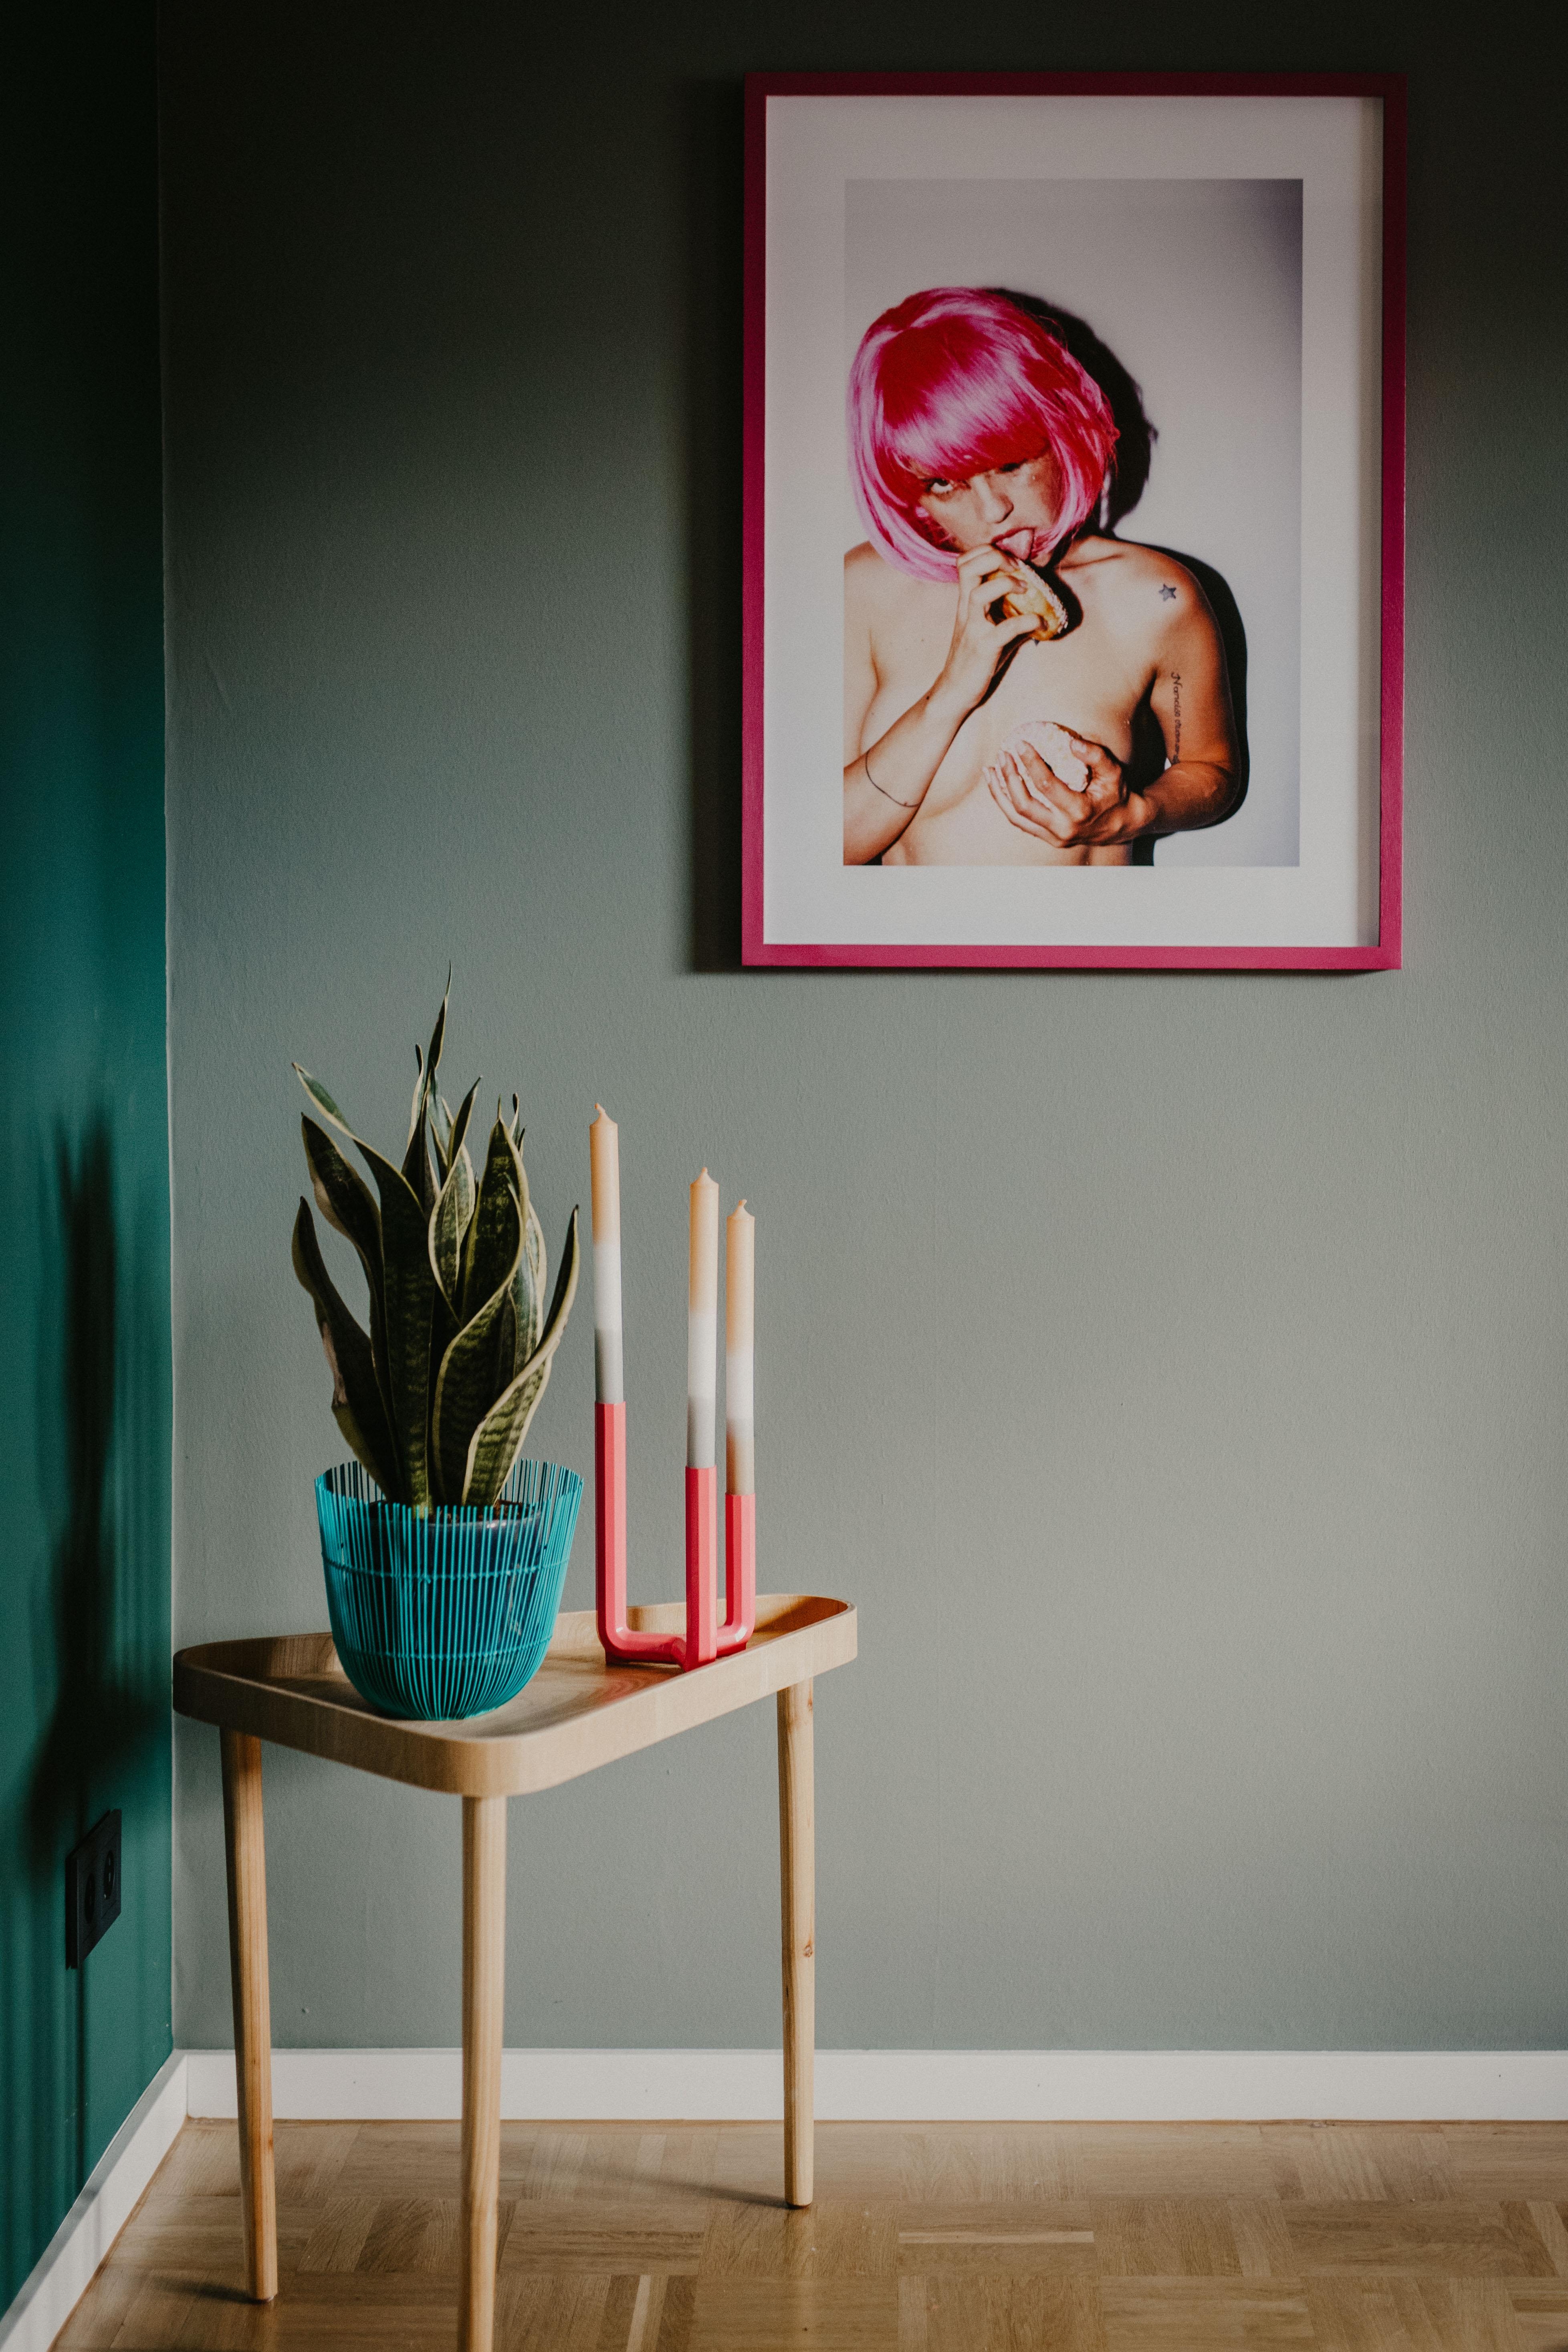 We love #pink!
#itsallaboutthedetails #art #frameworksberlin #artwork #photography #livingroominspo #COUCHstyle